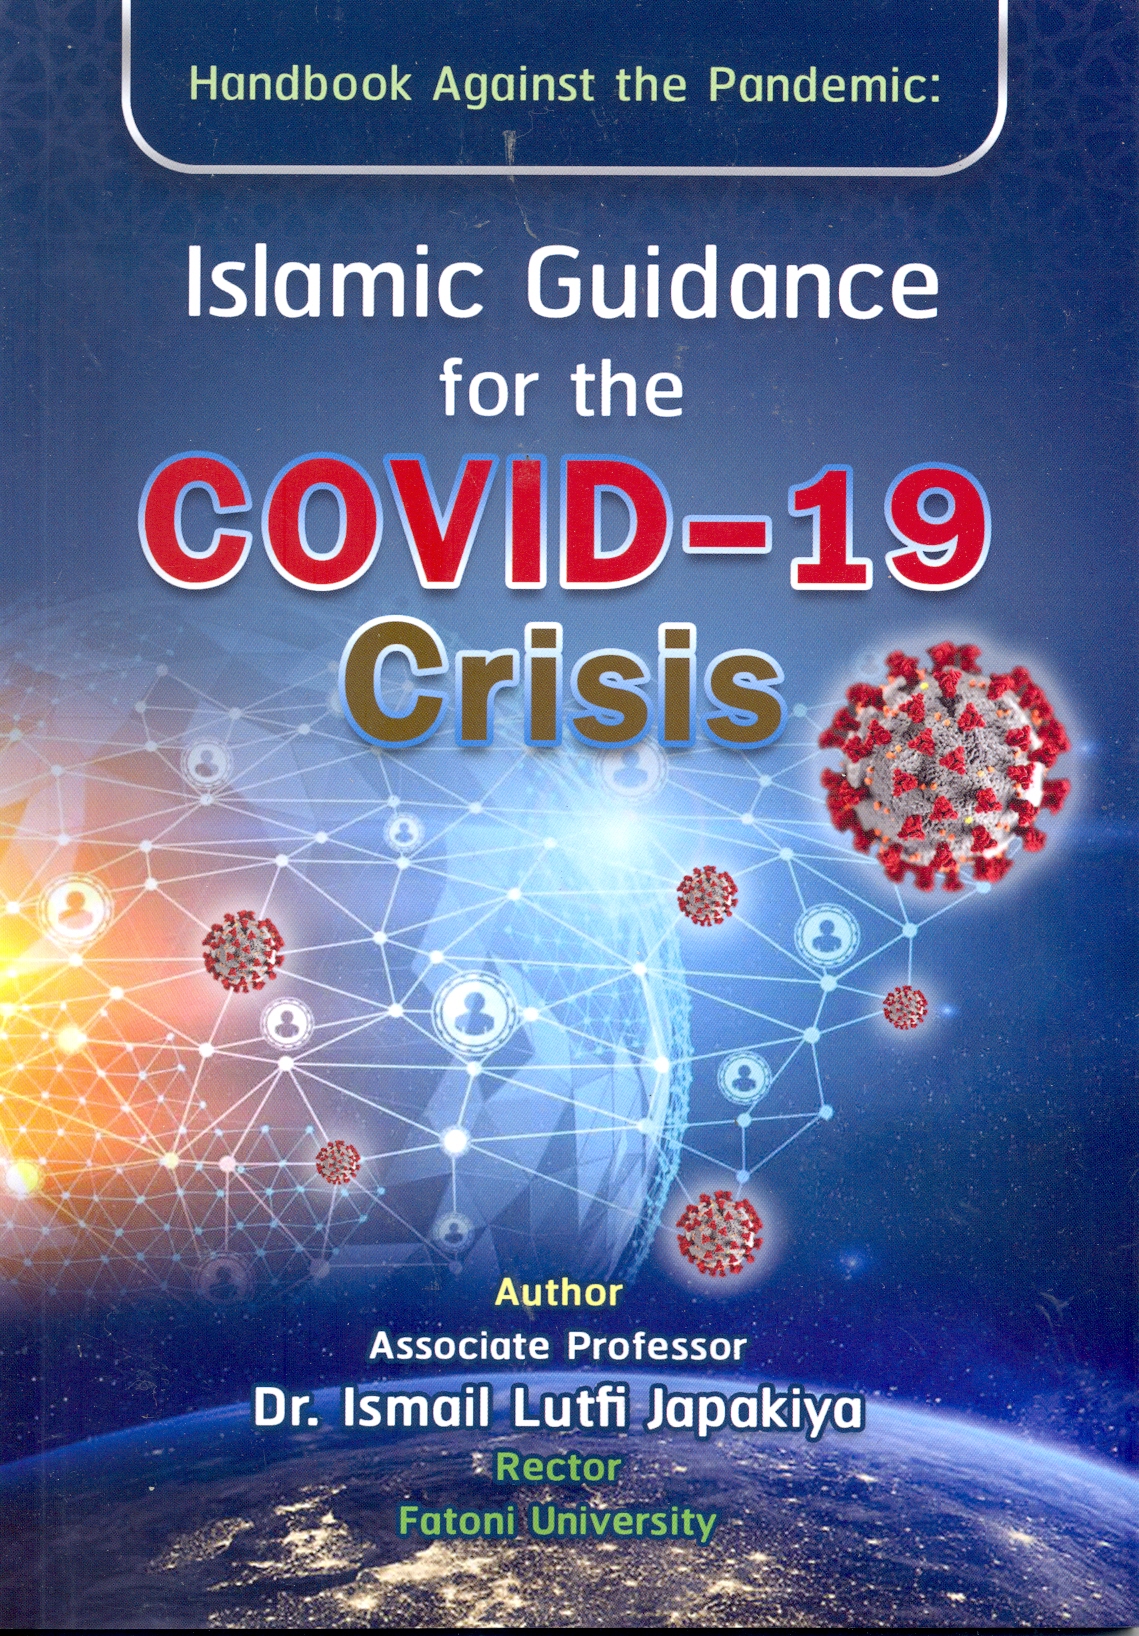 Hanbook against the pandemic : Islamic guidance for the COVID-19 crisis